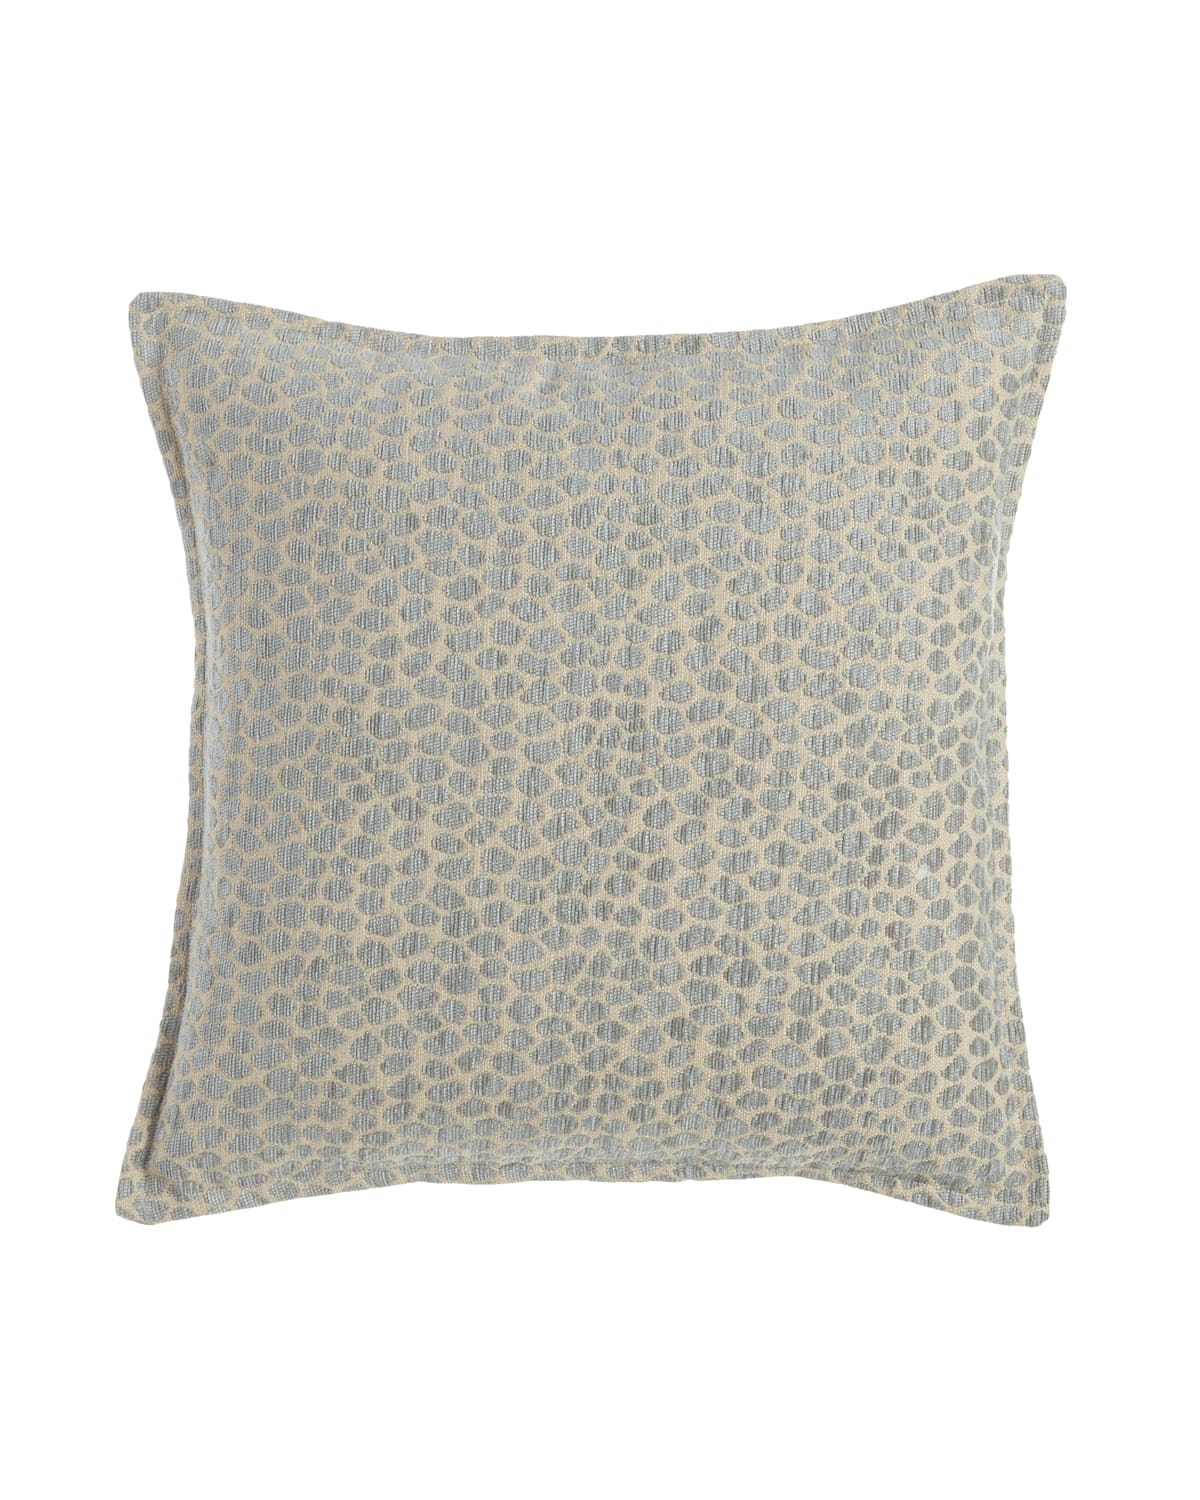 Image Isabella Collection by Kathy Fielder Caspin Spotted Pillow, 20"Sq.